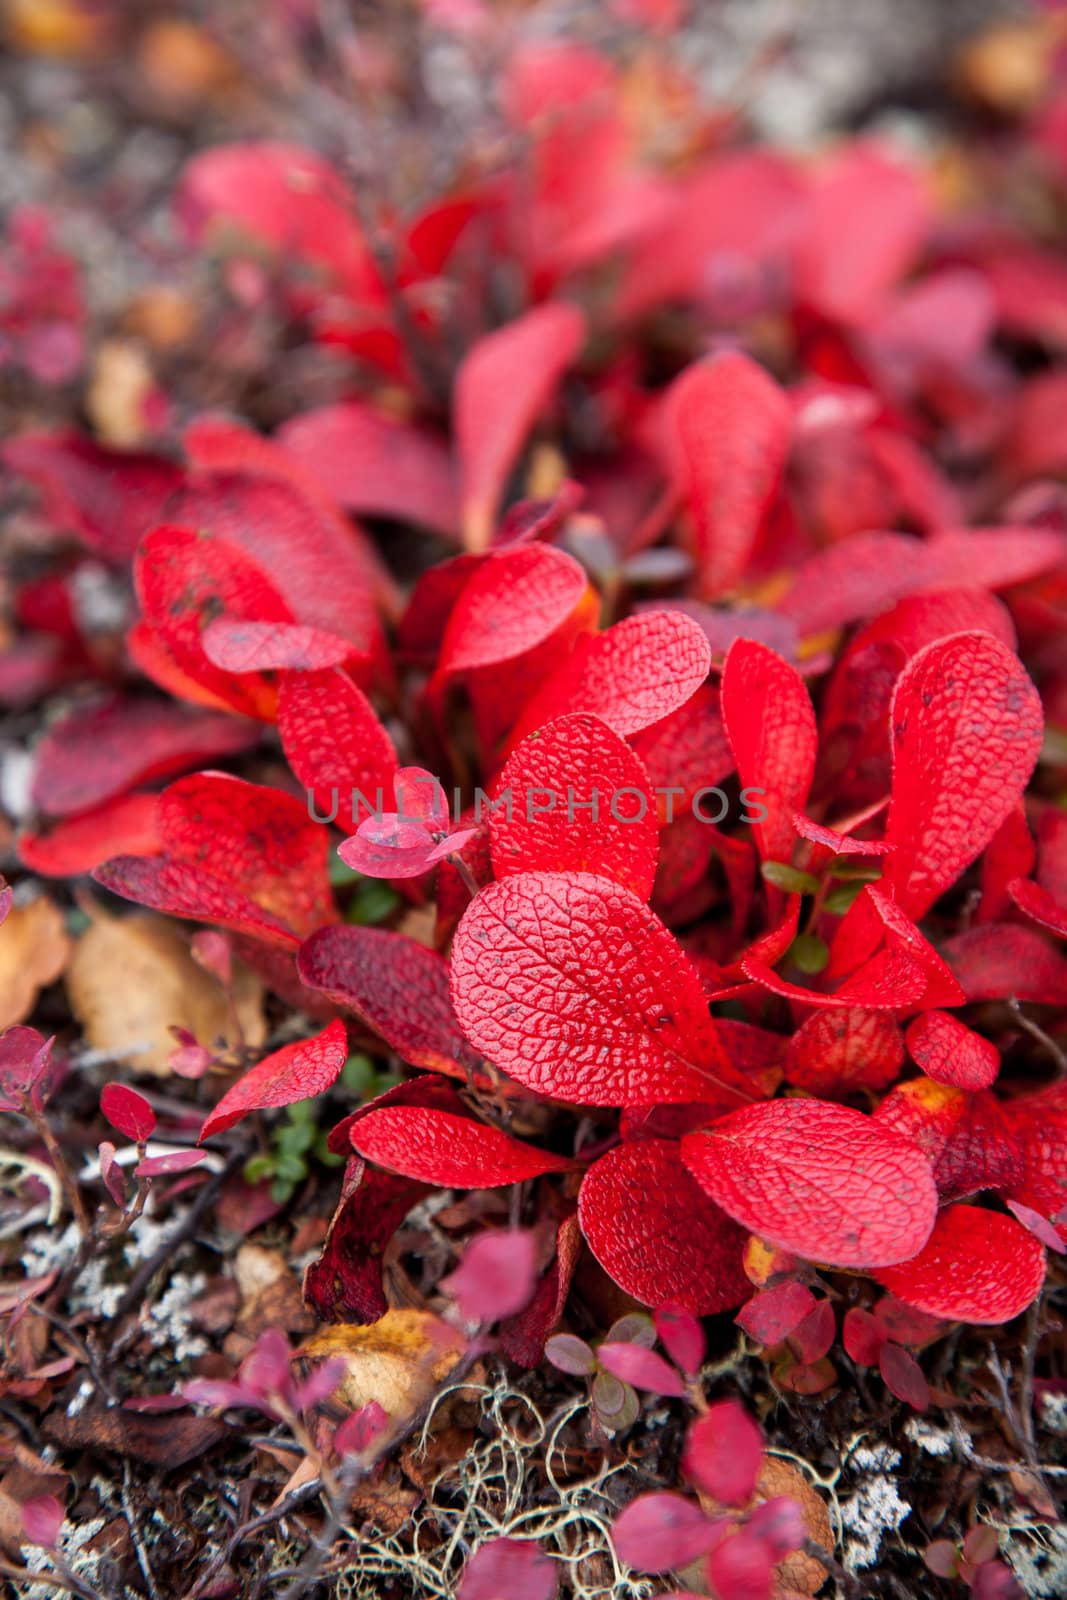 Red leaves of blueberry and crowberry plants